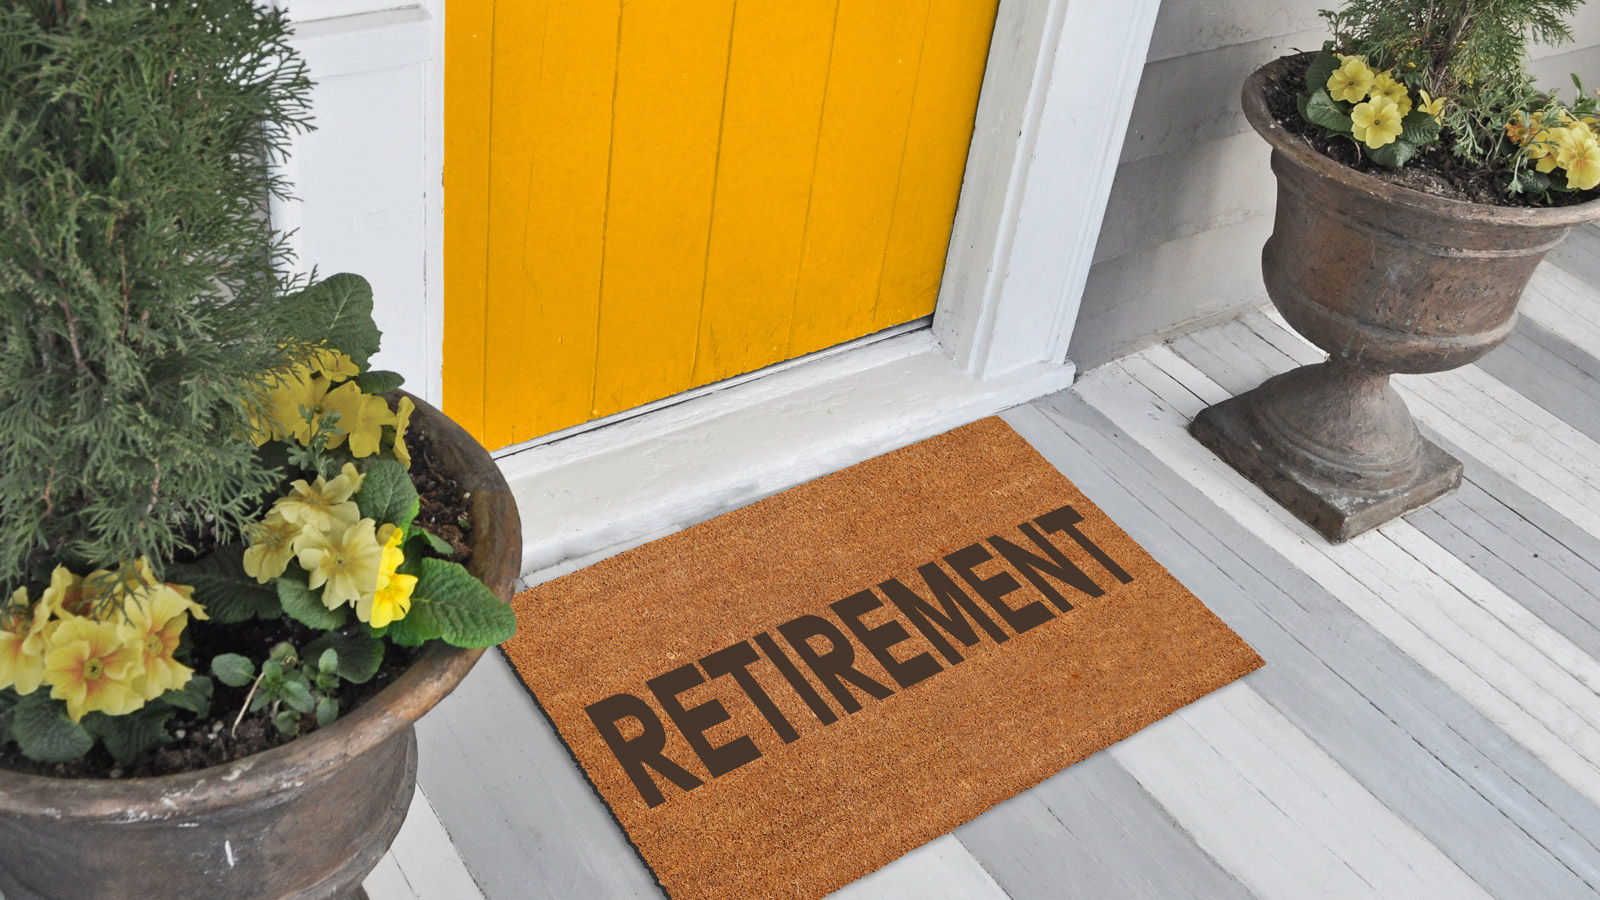 Transitioning into retirement: What you should know